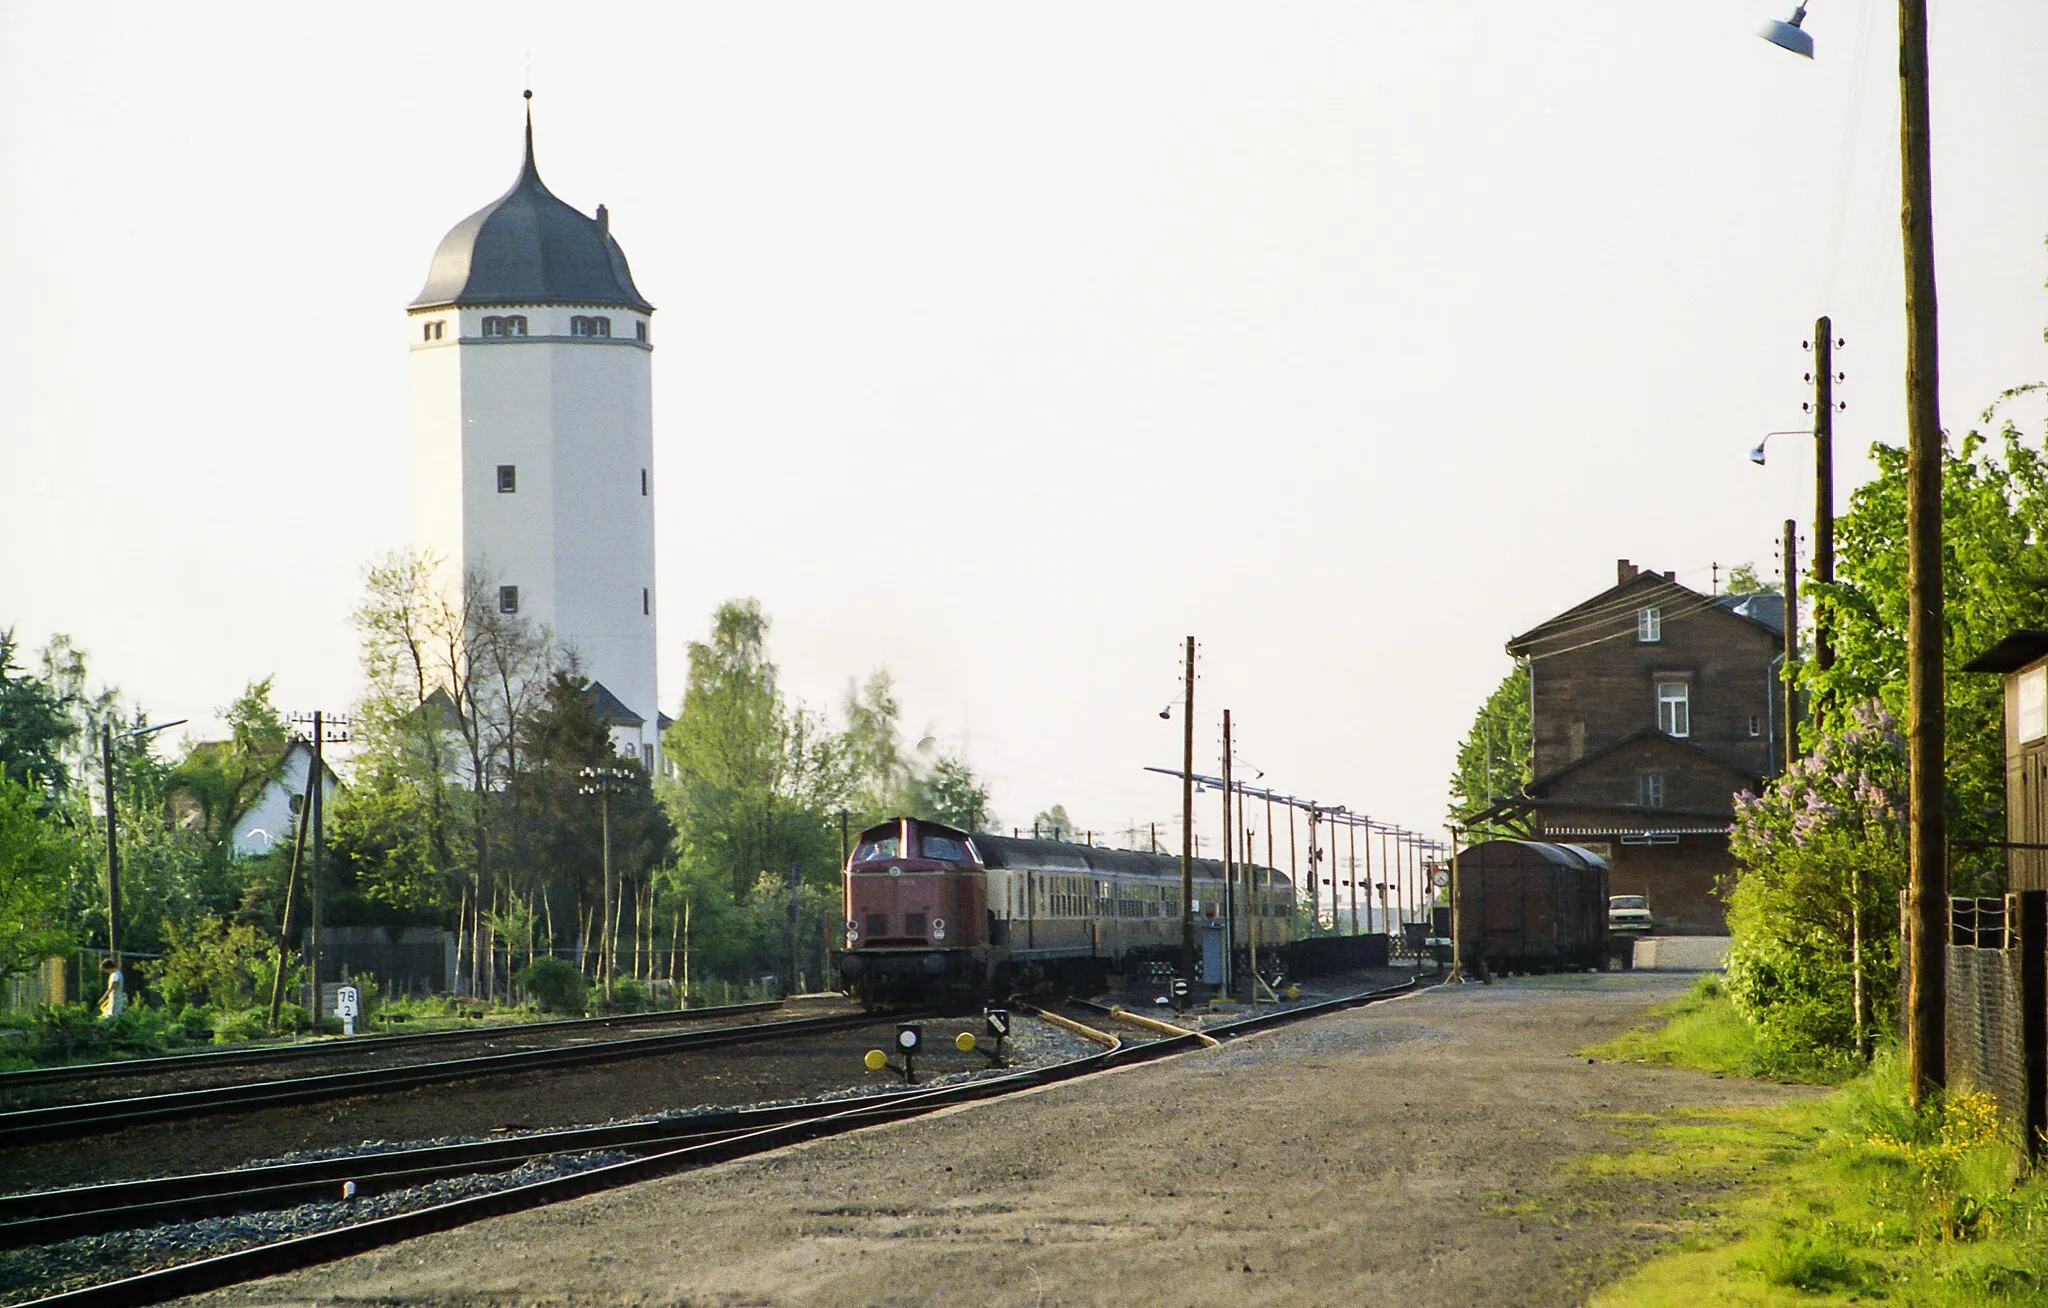 Photo showing: Locomotive 212 358-6 (Hanau depot) in front of train E 2357 (Frankfurt / M Hbf - Stuttgart Hbf) at the departure in Seligenstadt (Hesse) on May 14, 1980, in the background the historic water tower